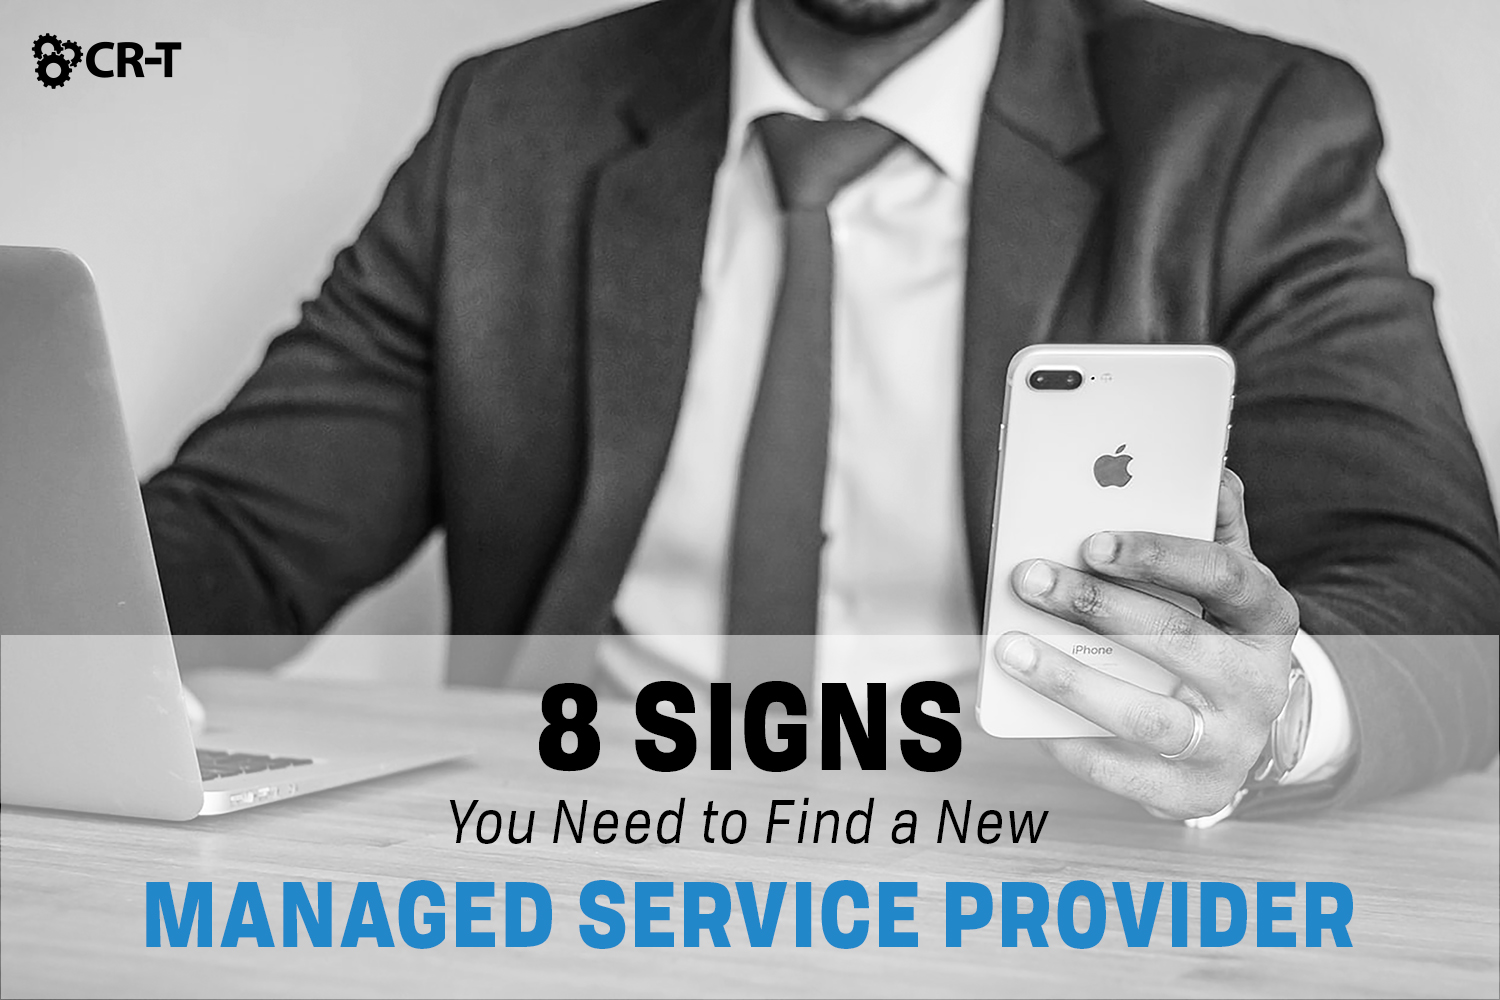 You are currently viewing 8 Signs You Need to Find a New Managed Service Provider